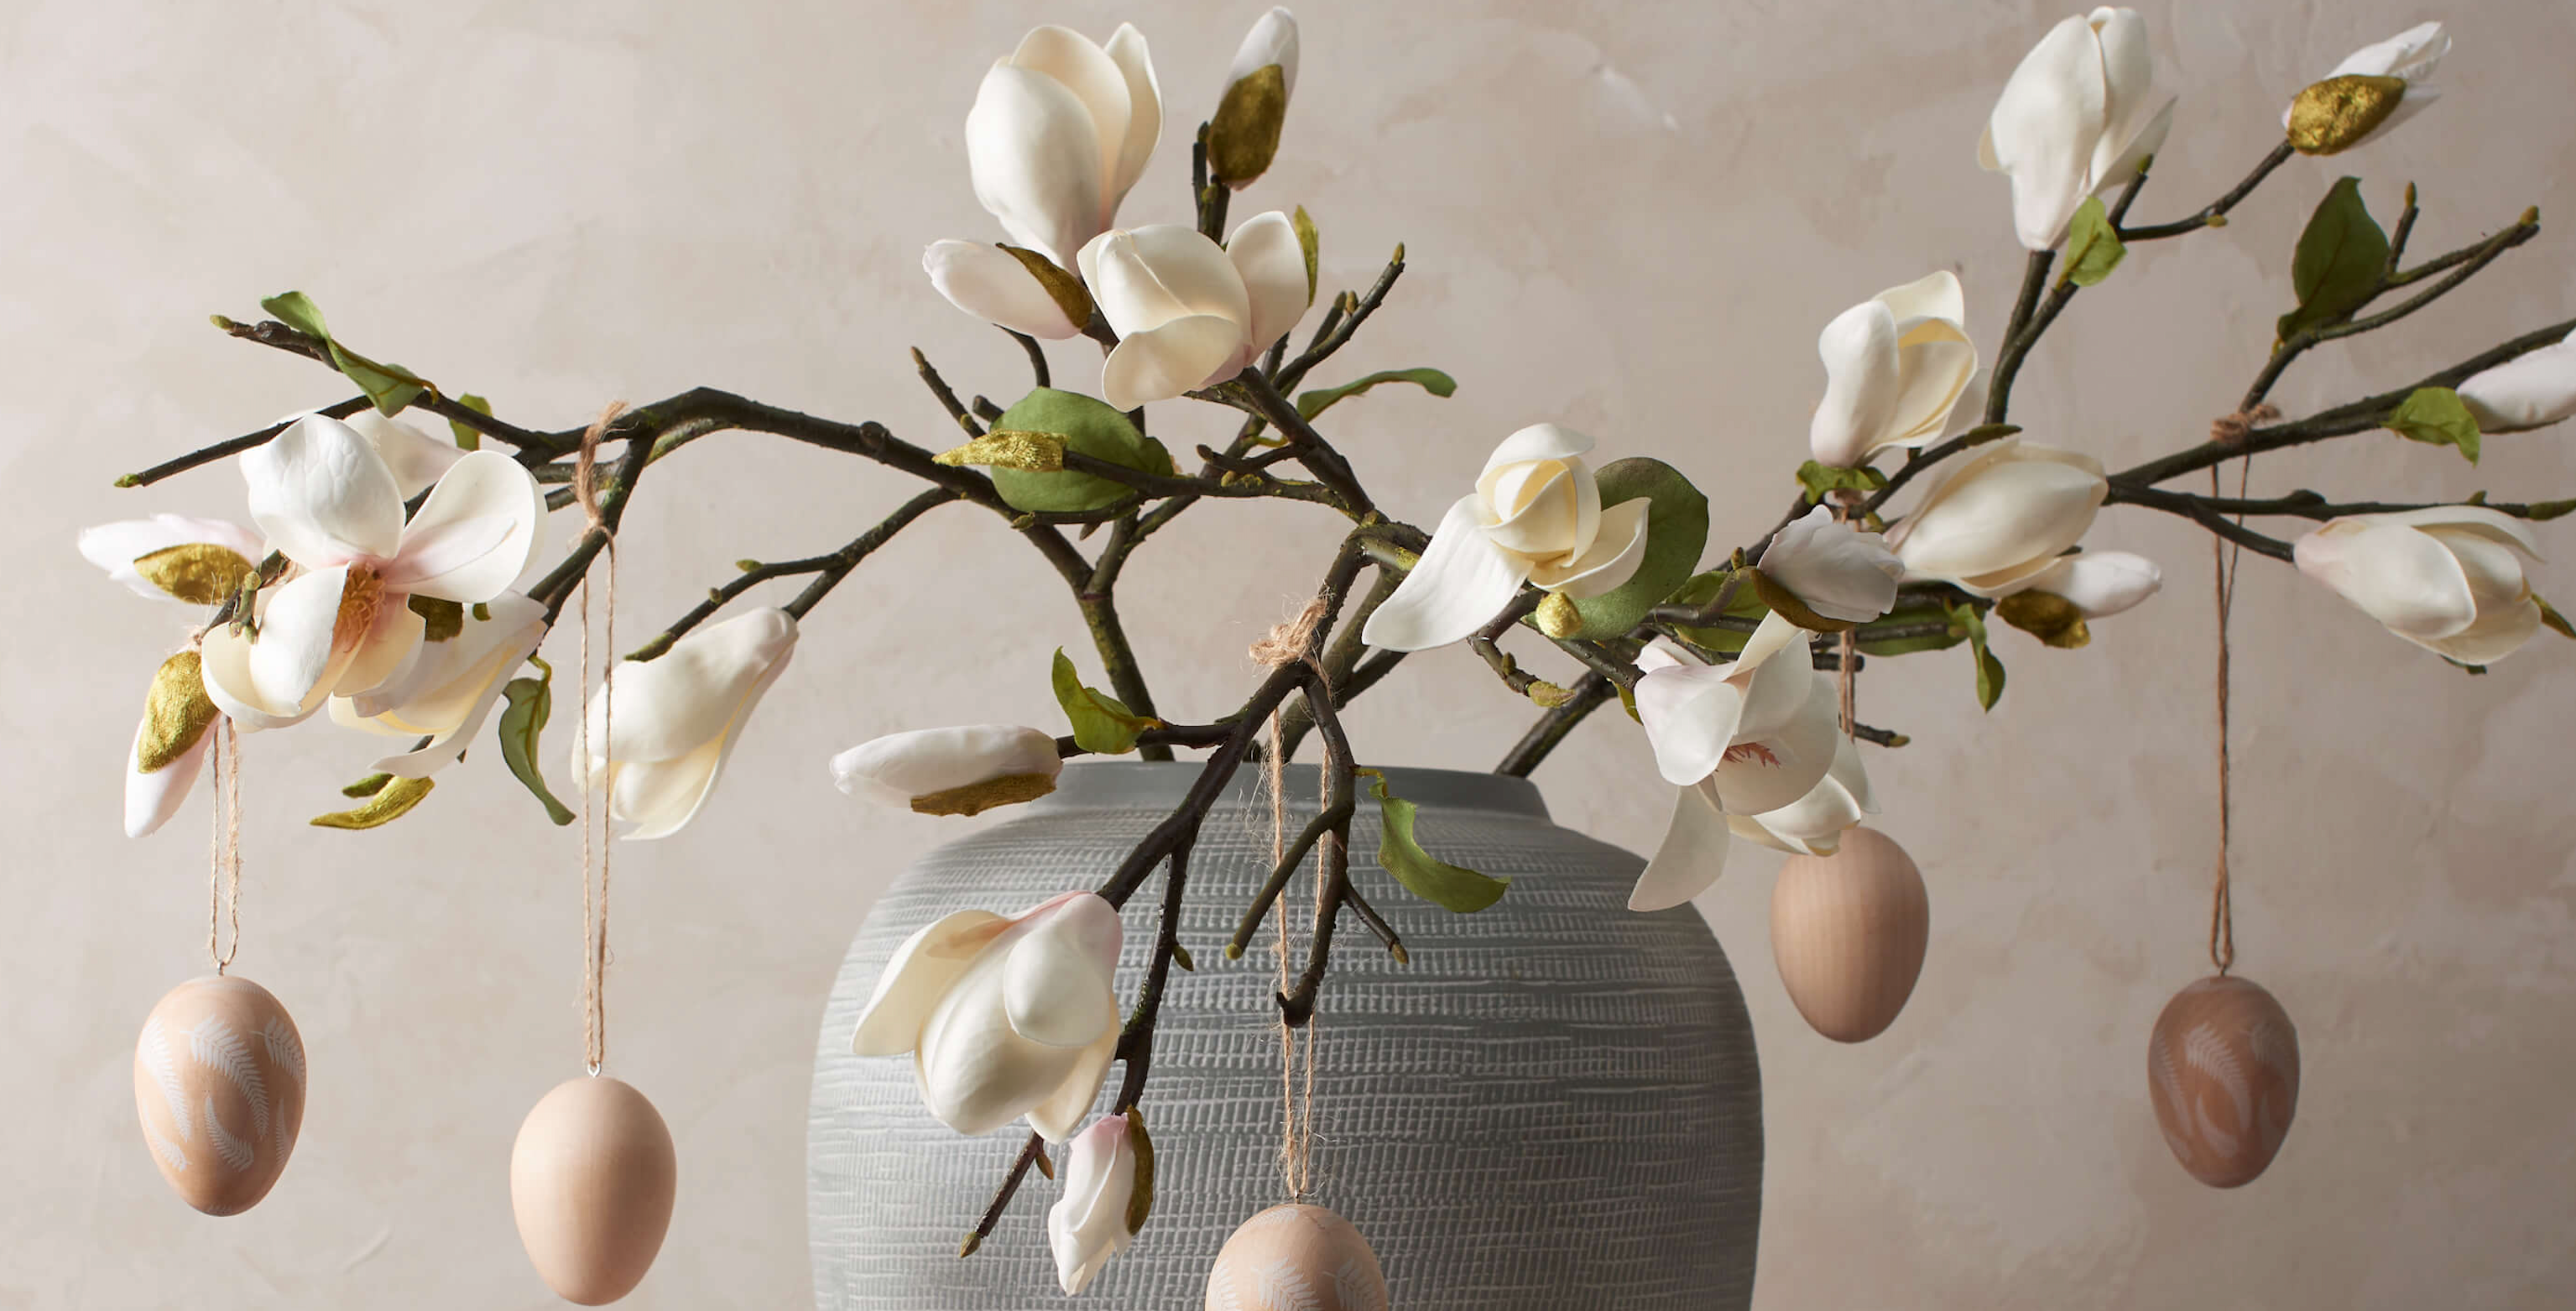 Create Some Extraordinary Easter Decorations!